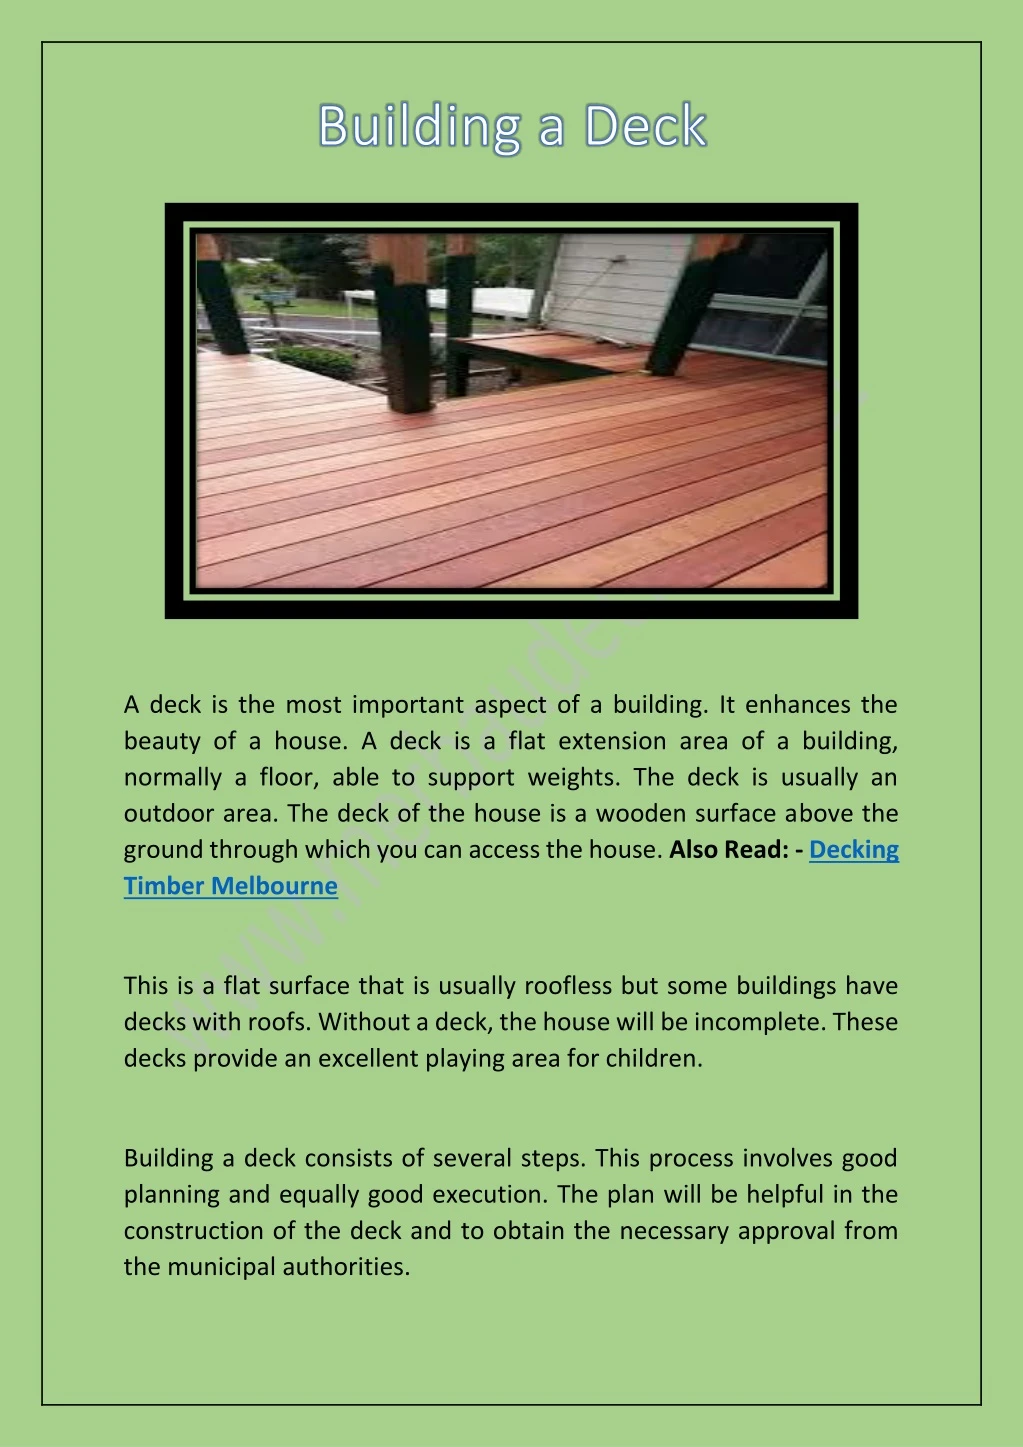 a deck is the most important aspect of a building